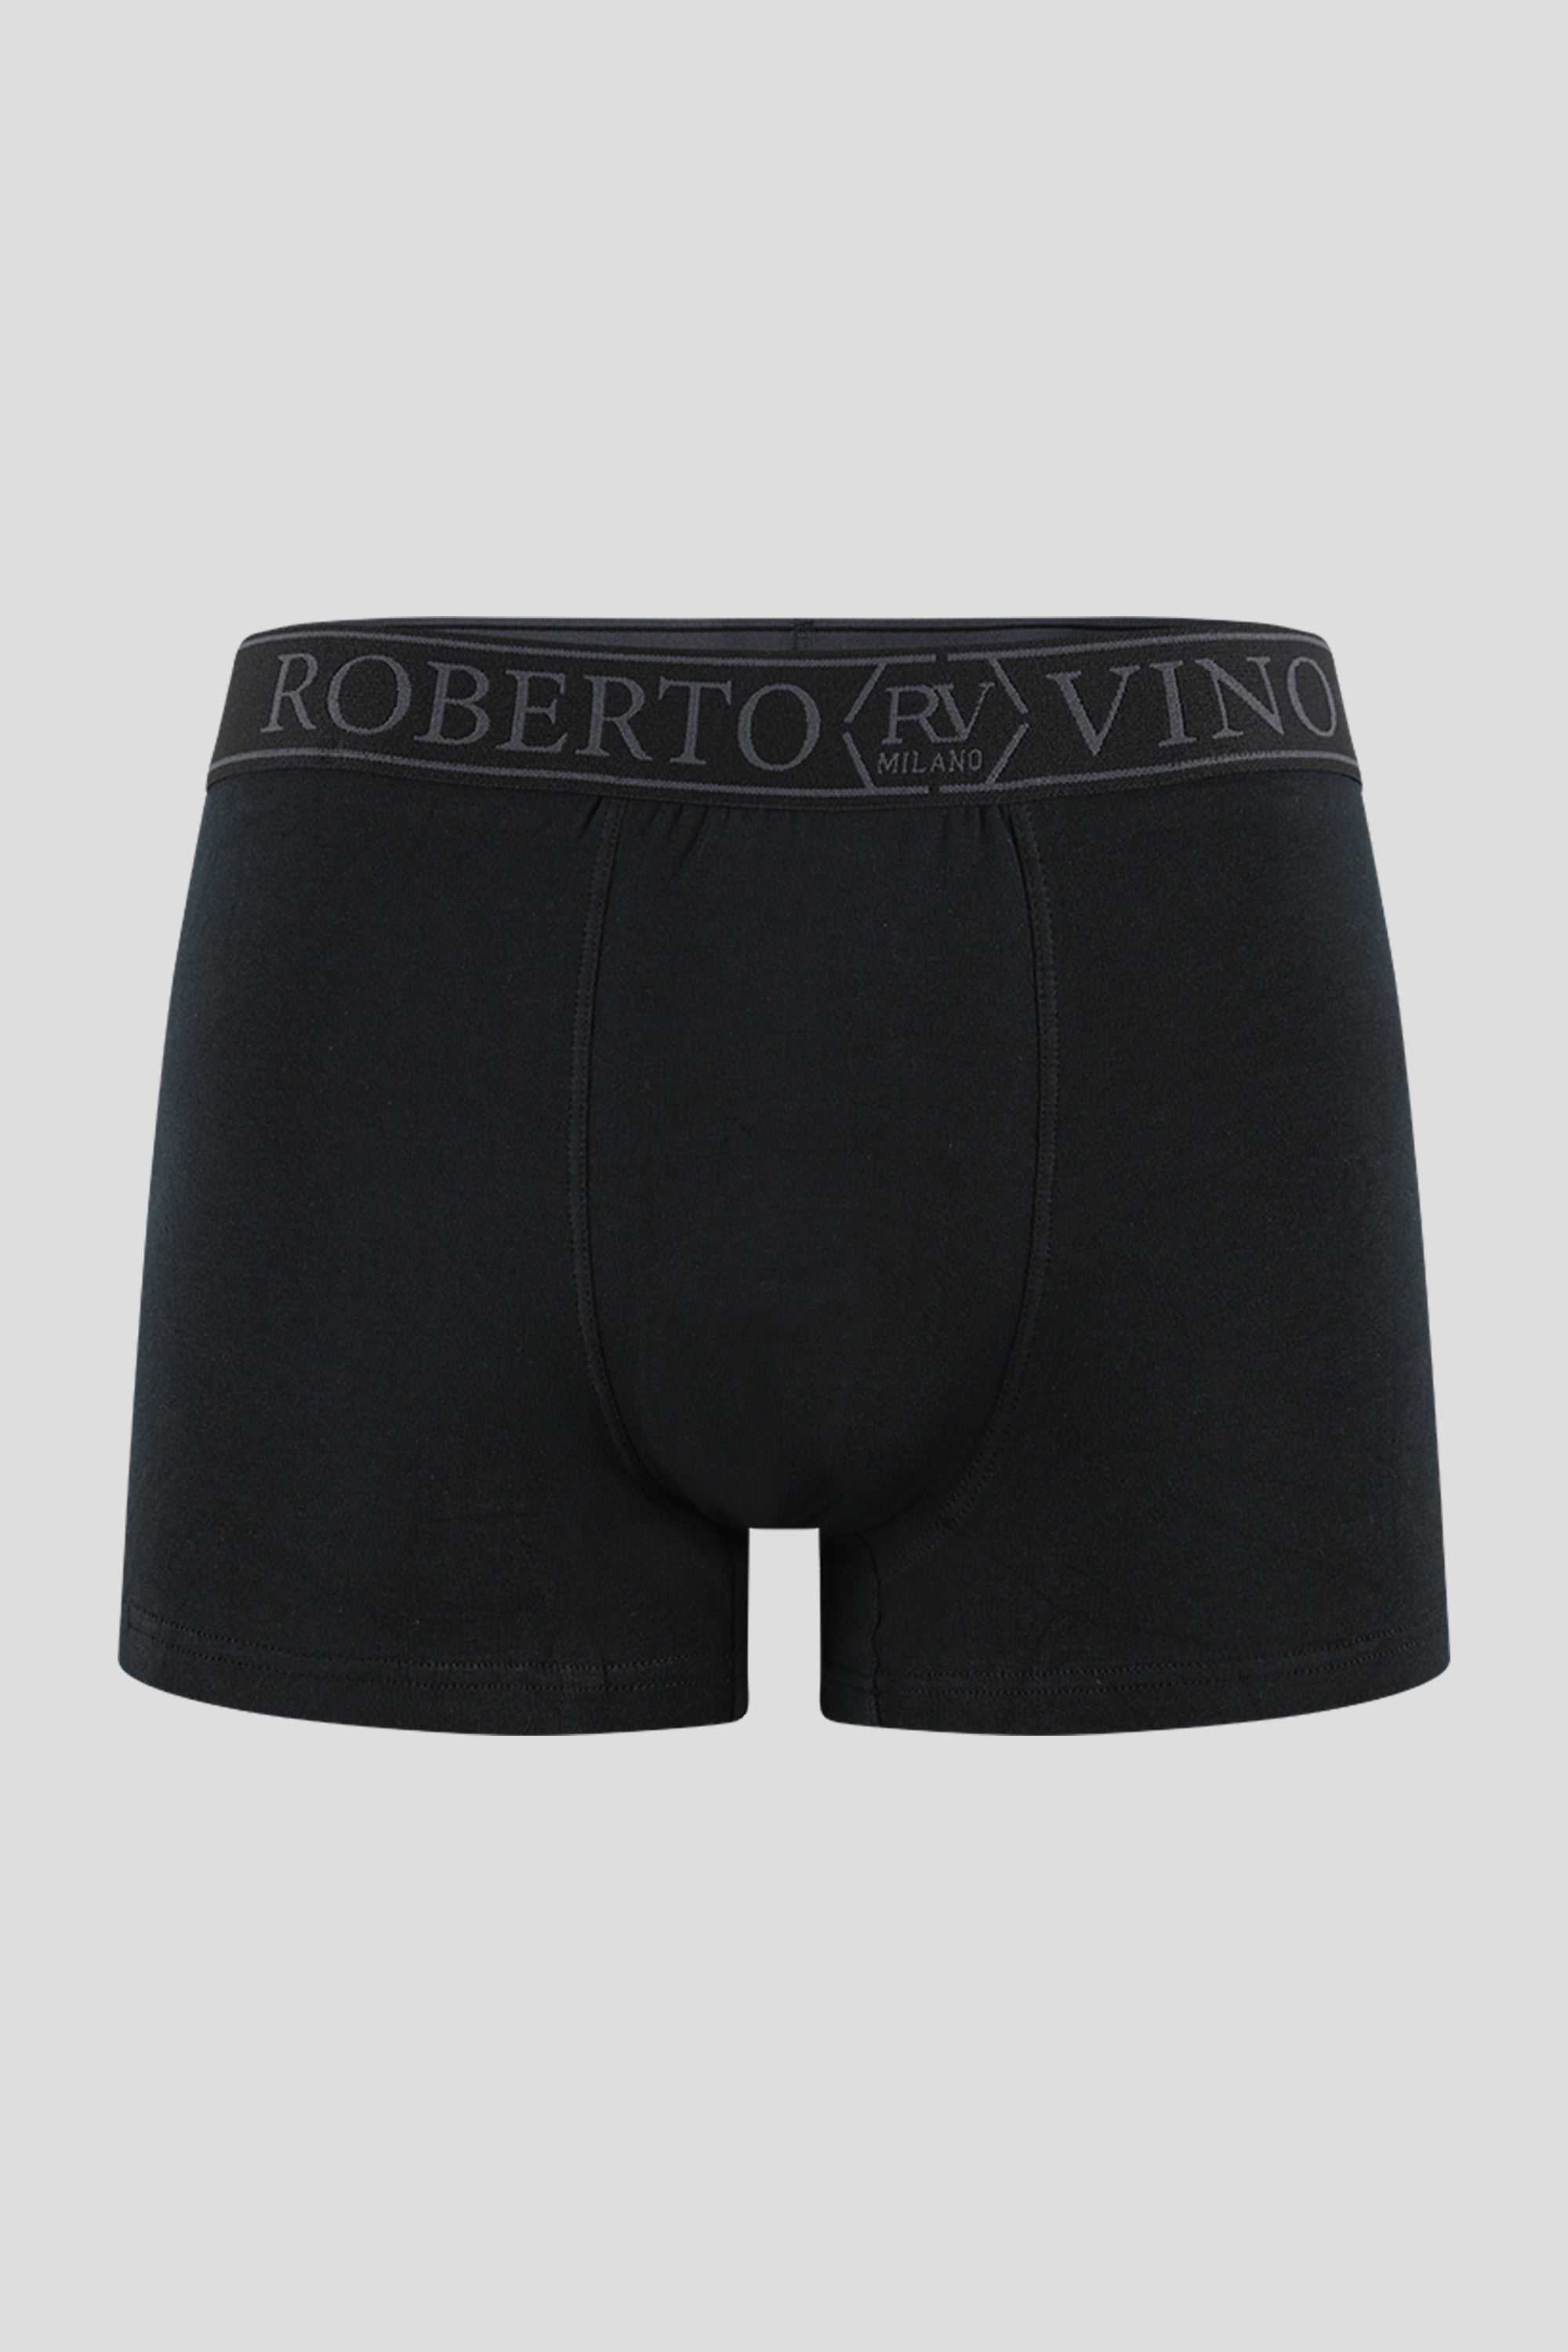 MILANO 3 pack boxers